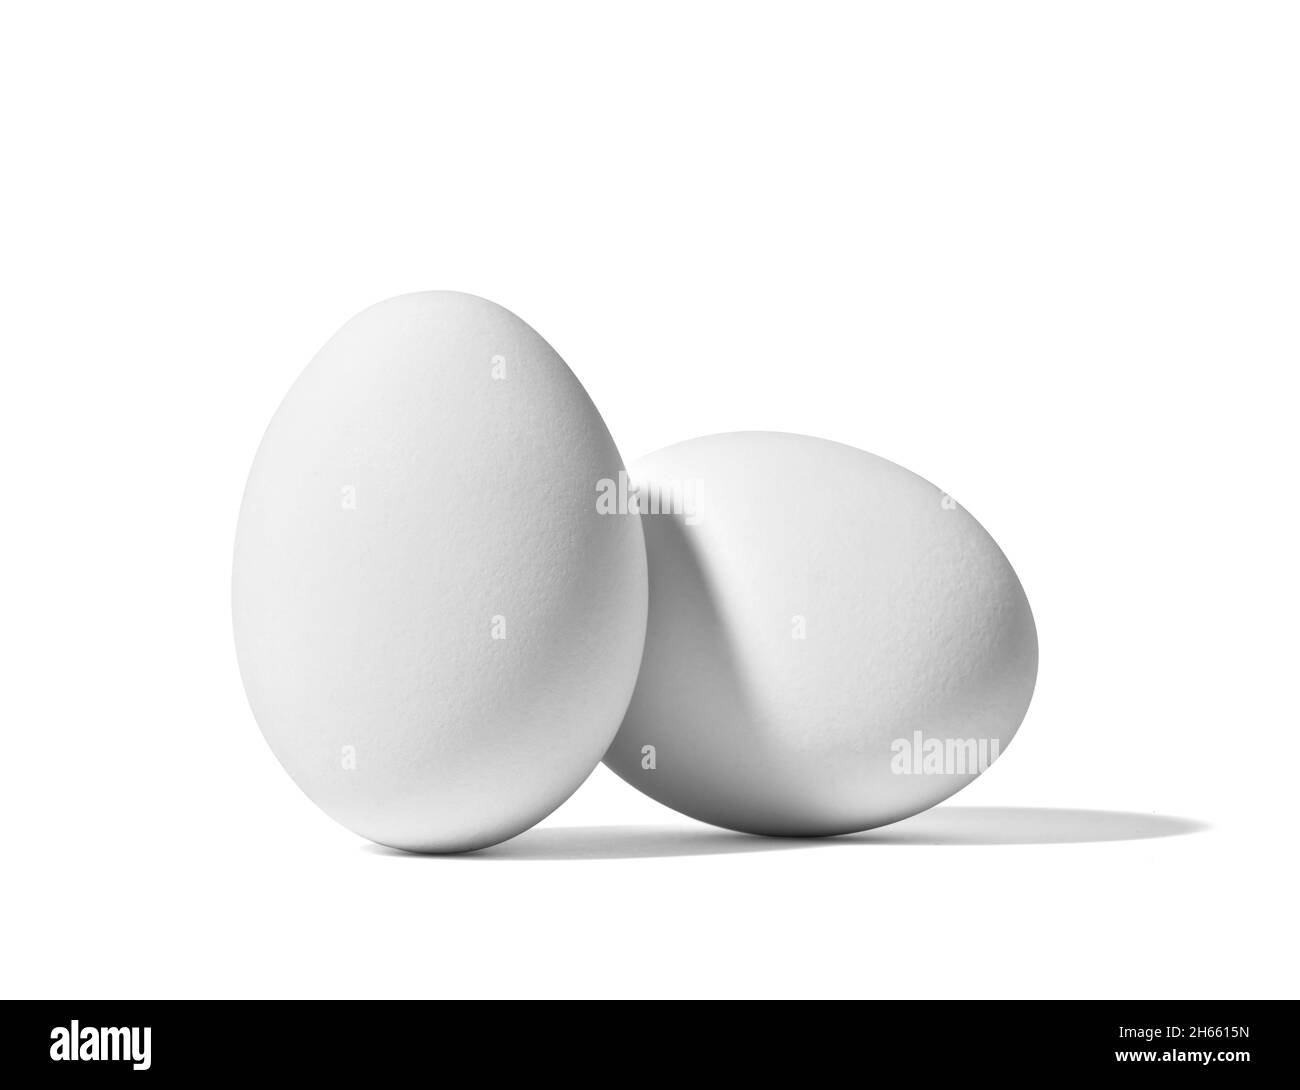 egg food white breakfast ingredient background protein isolated chicken healthy easter organic eggshell Stock Photo